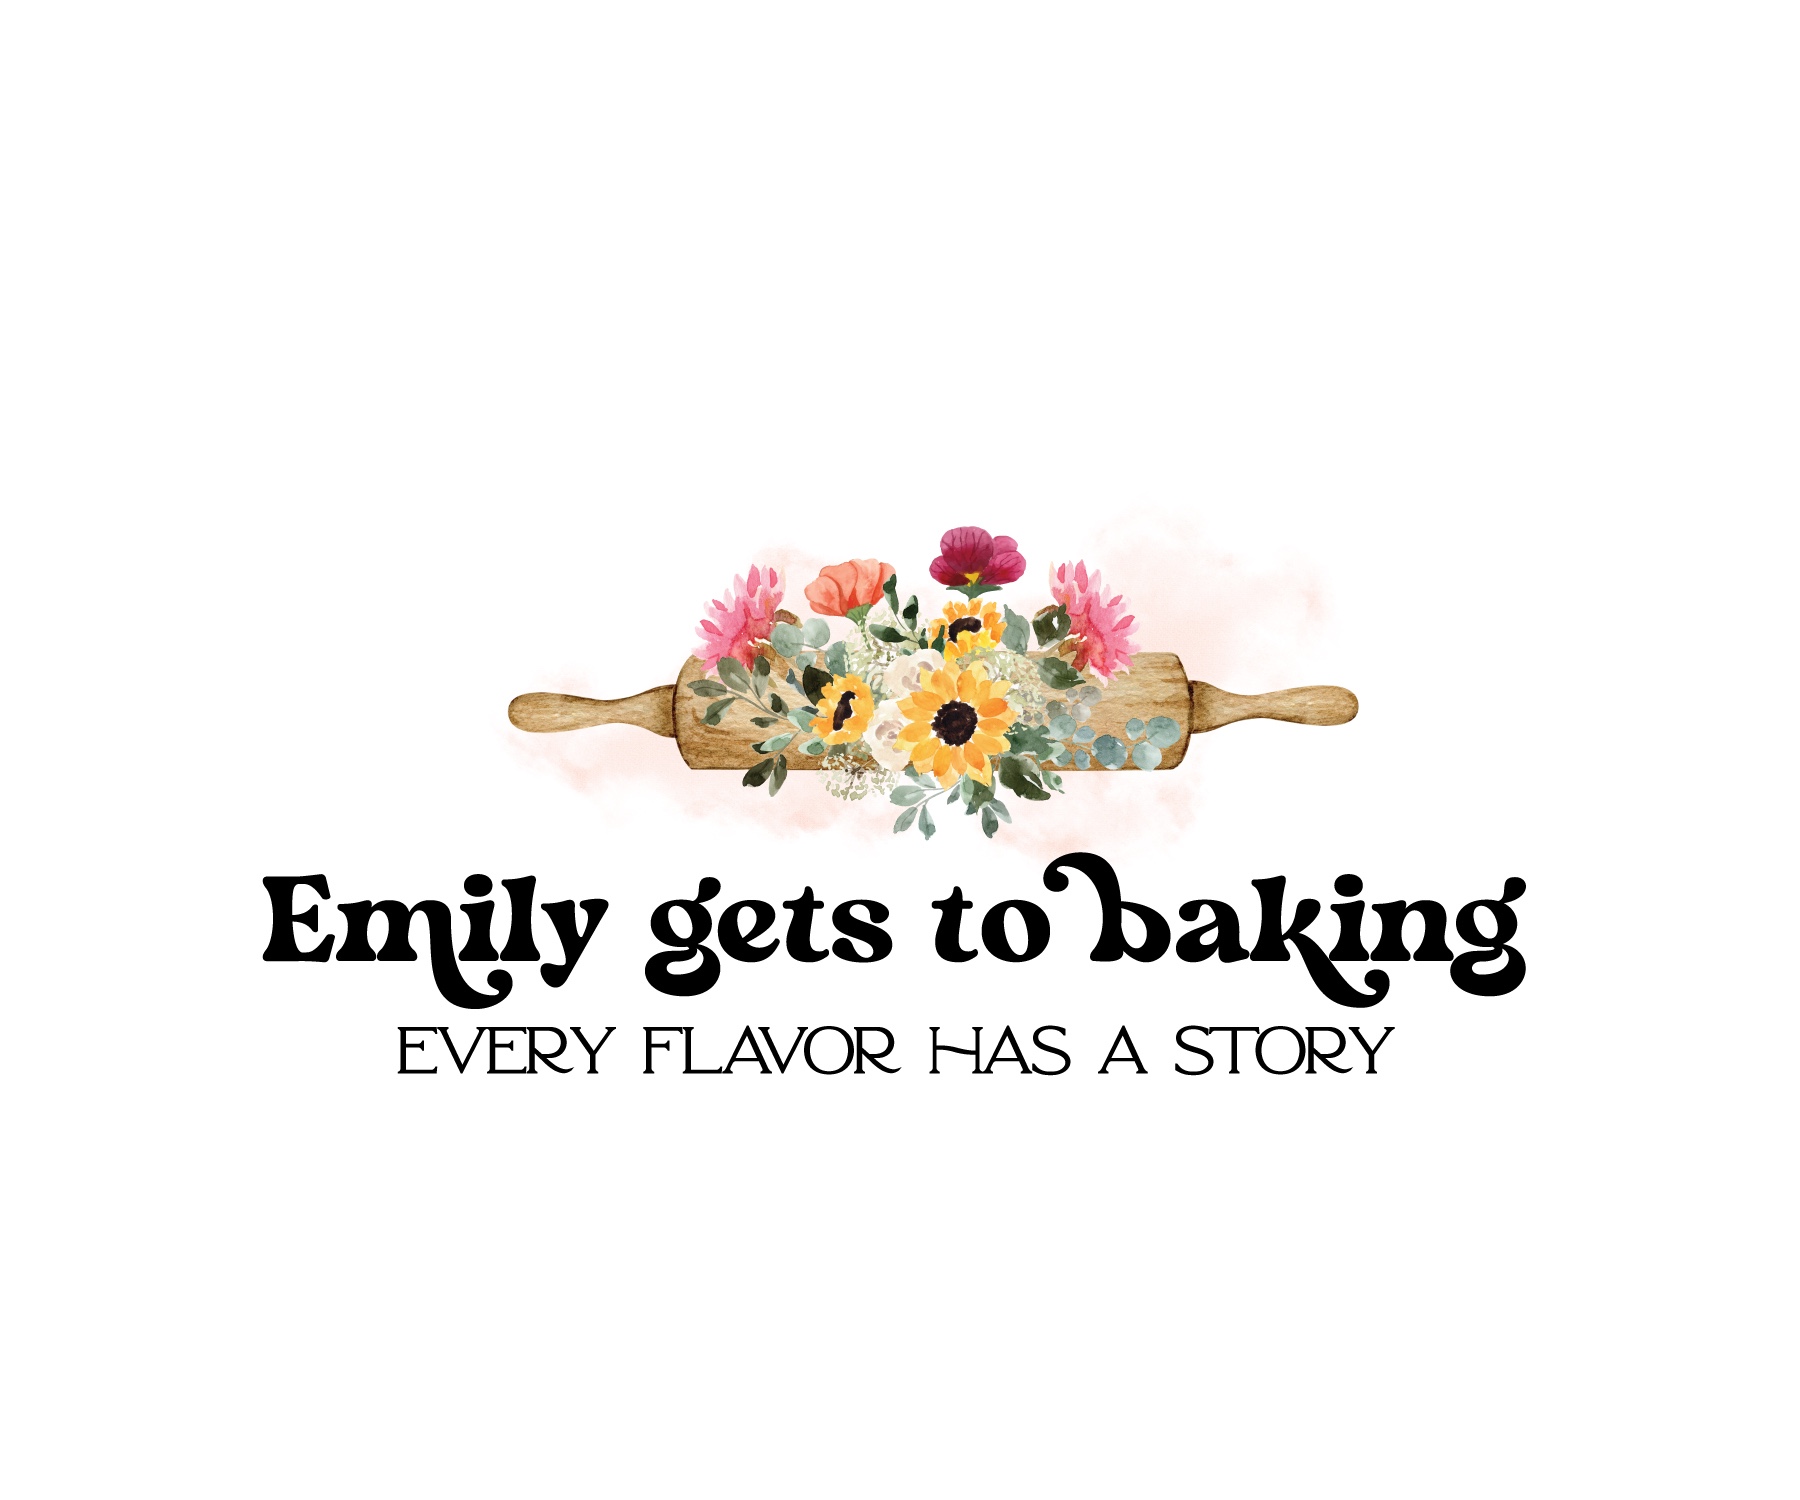 Emily gets to baking